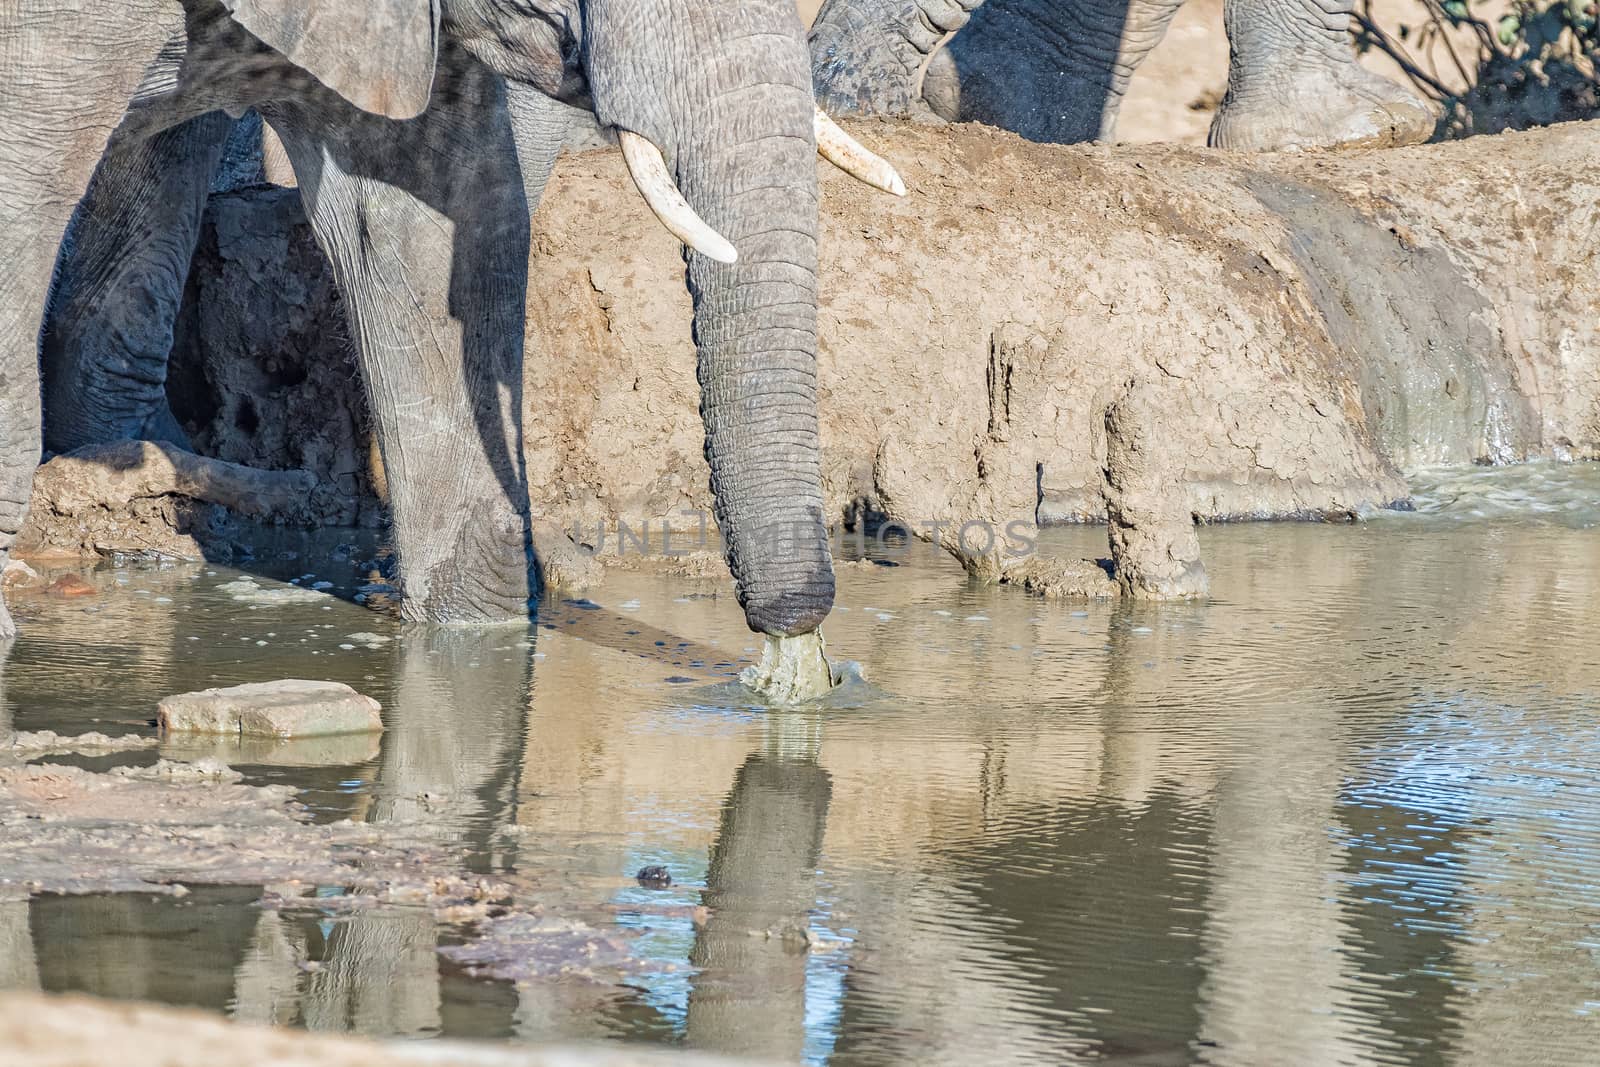 An african elephant, Loxodonta africana, with a defrmed trunk, drinking water